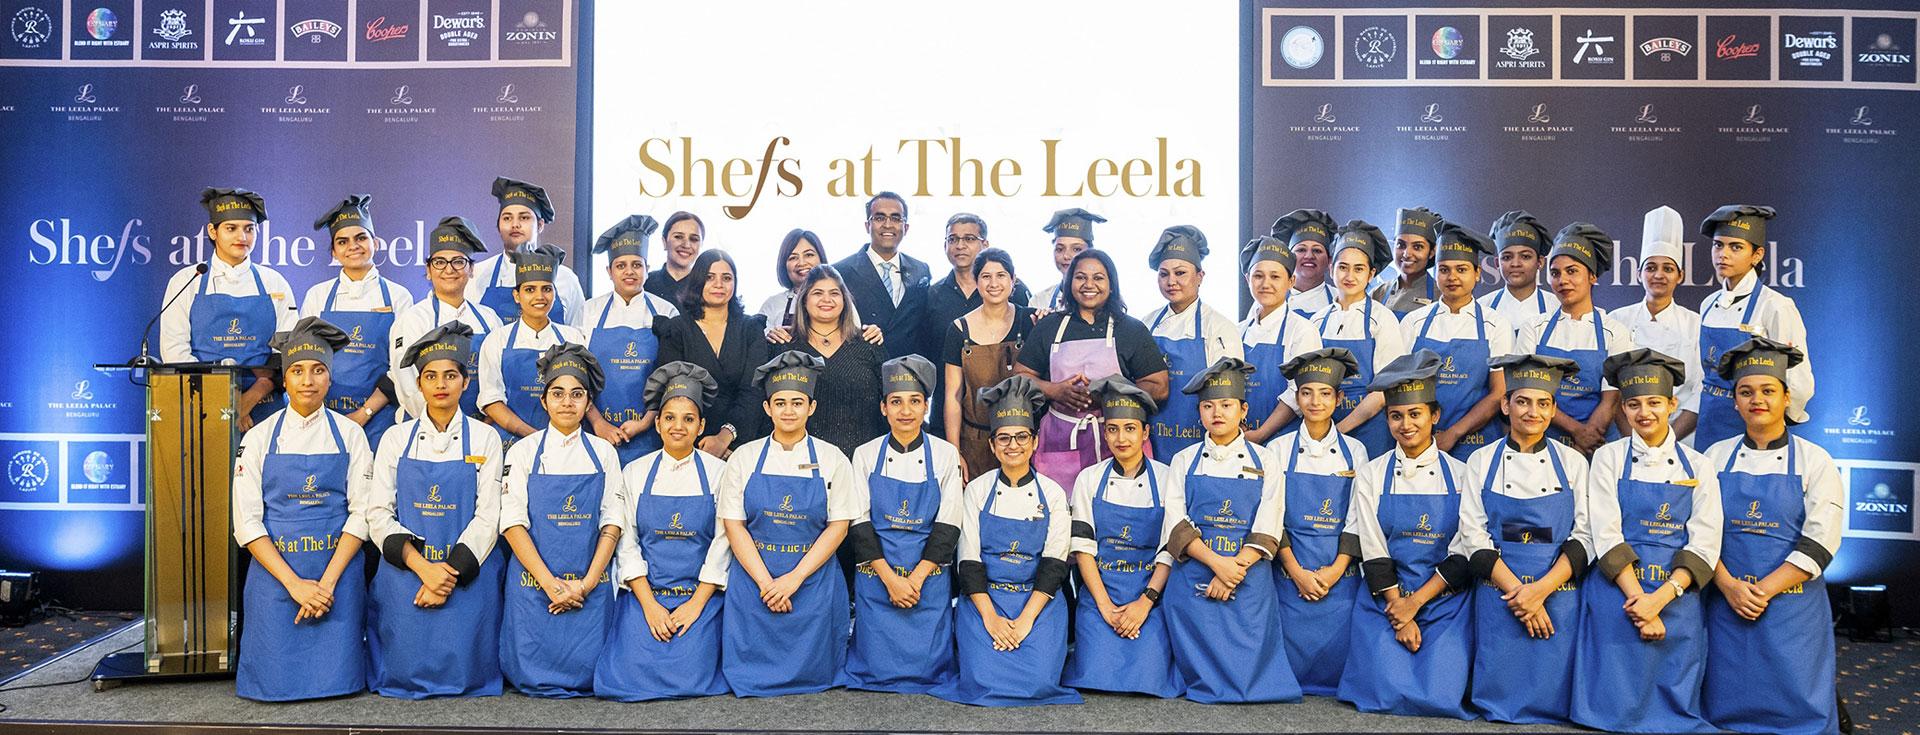  #Leelaempowersher - A month long celebration of empowering women at The Leela and beyond